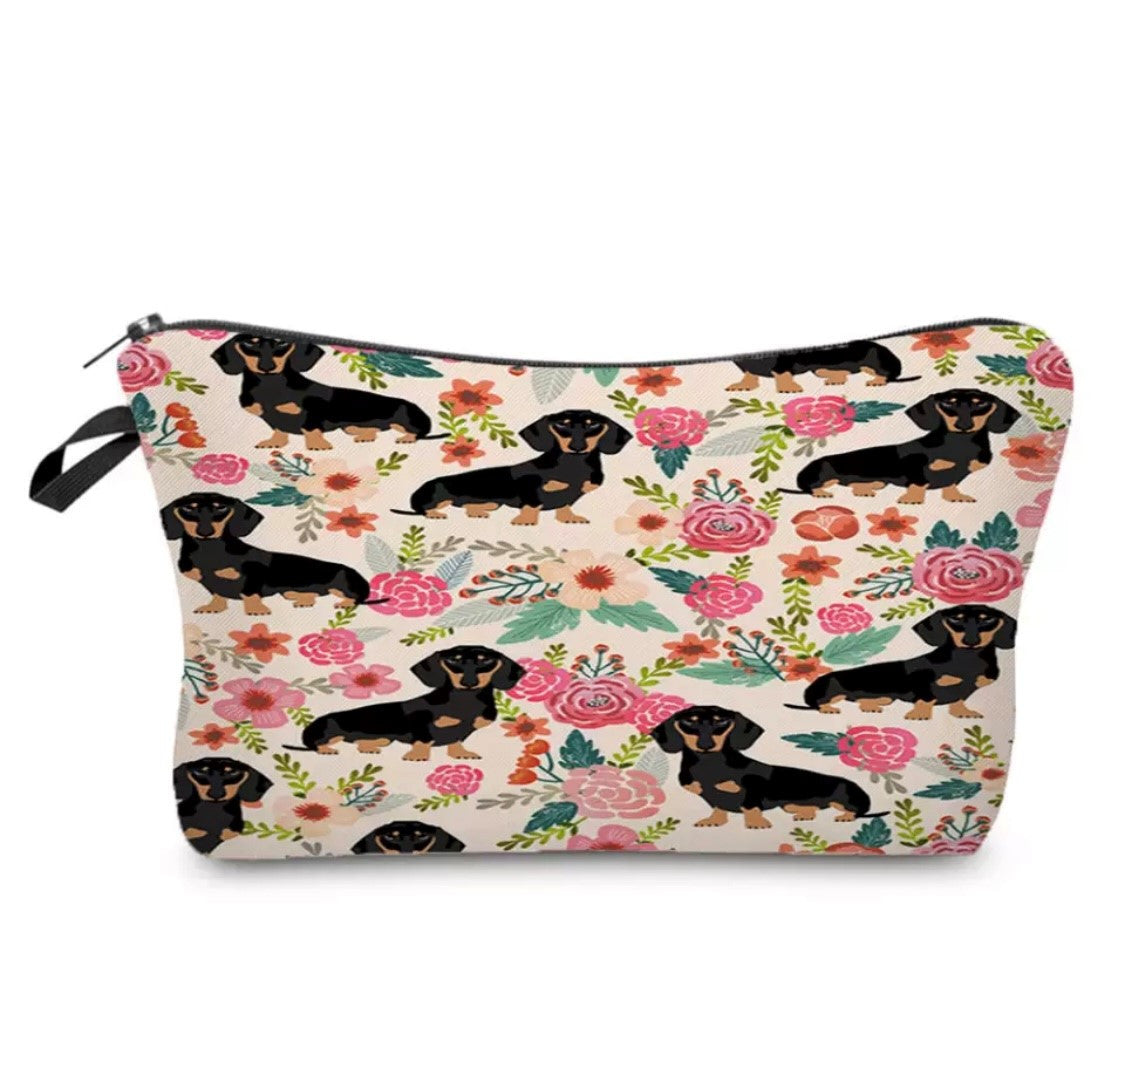 Doggy Bag sets including Free small zip up case